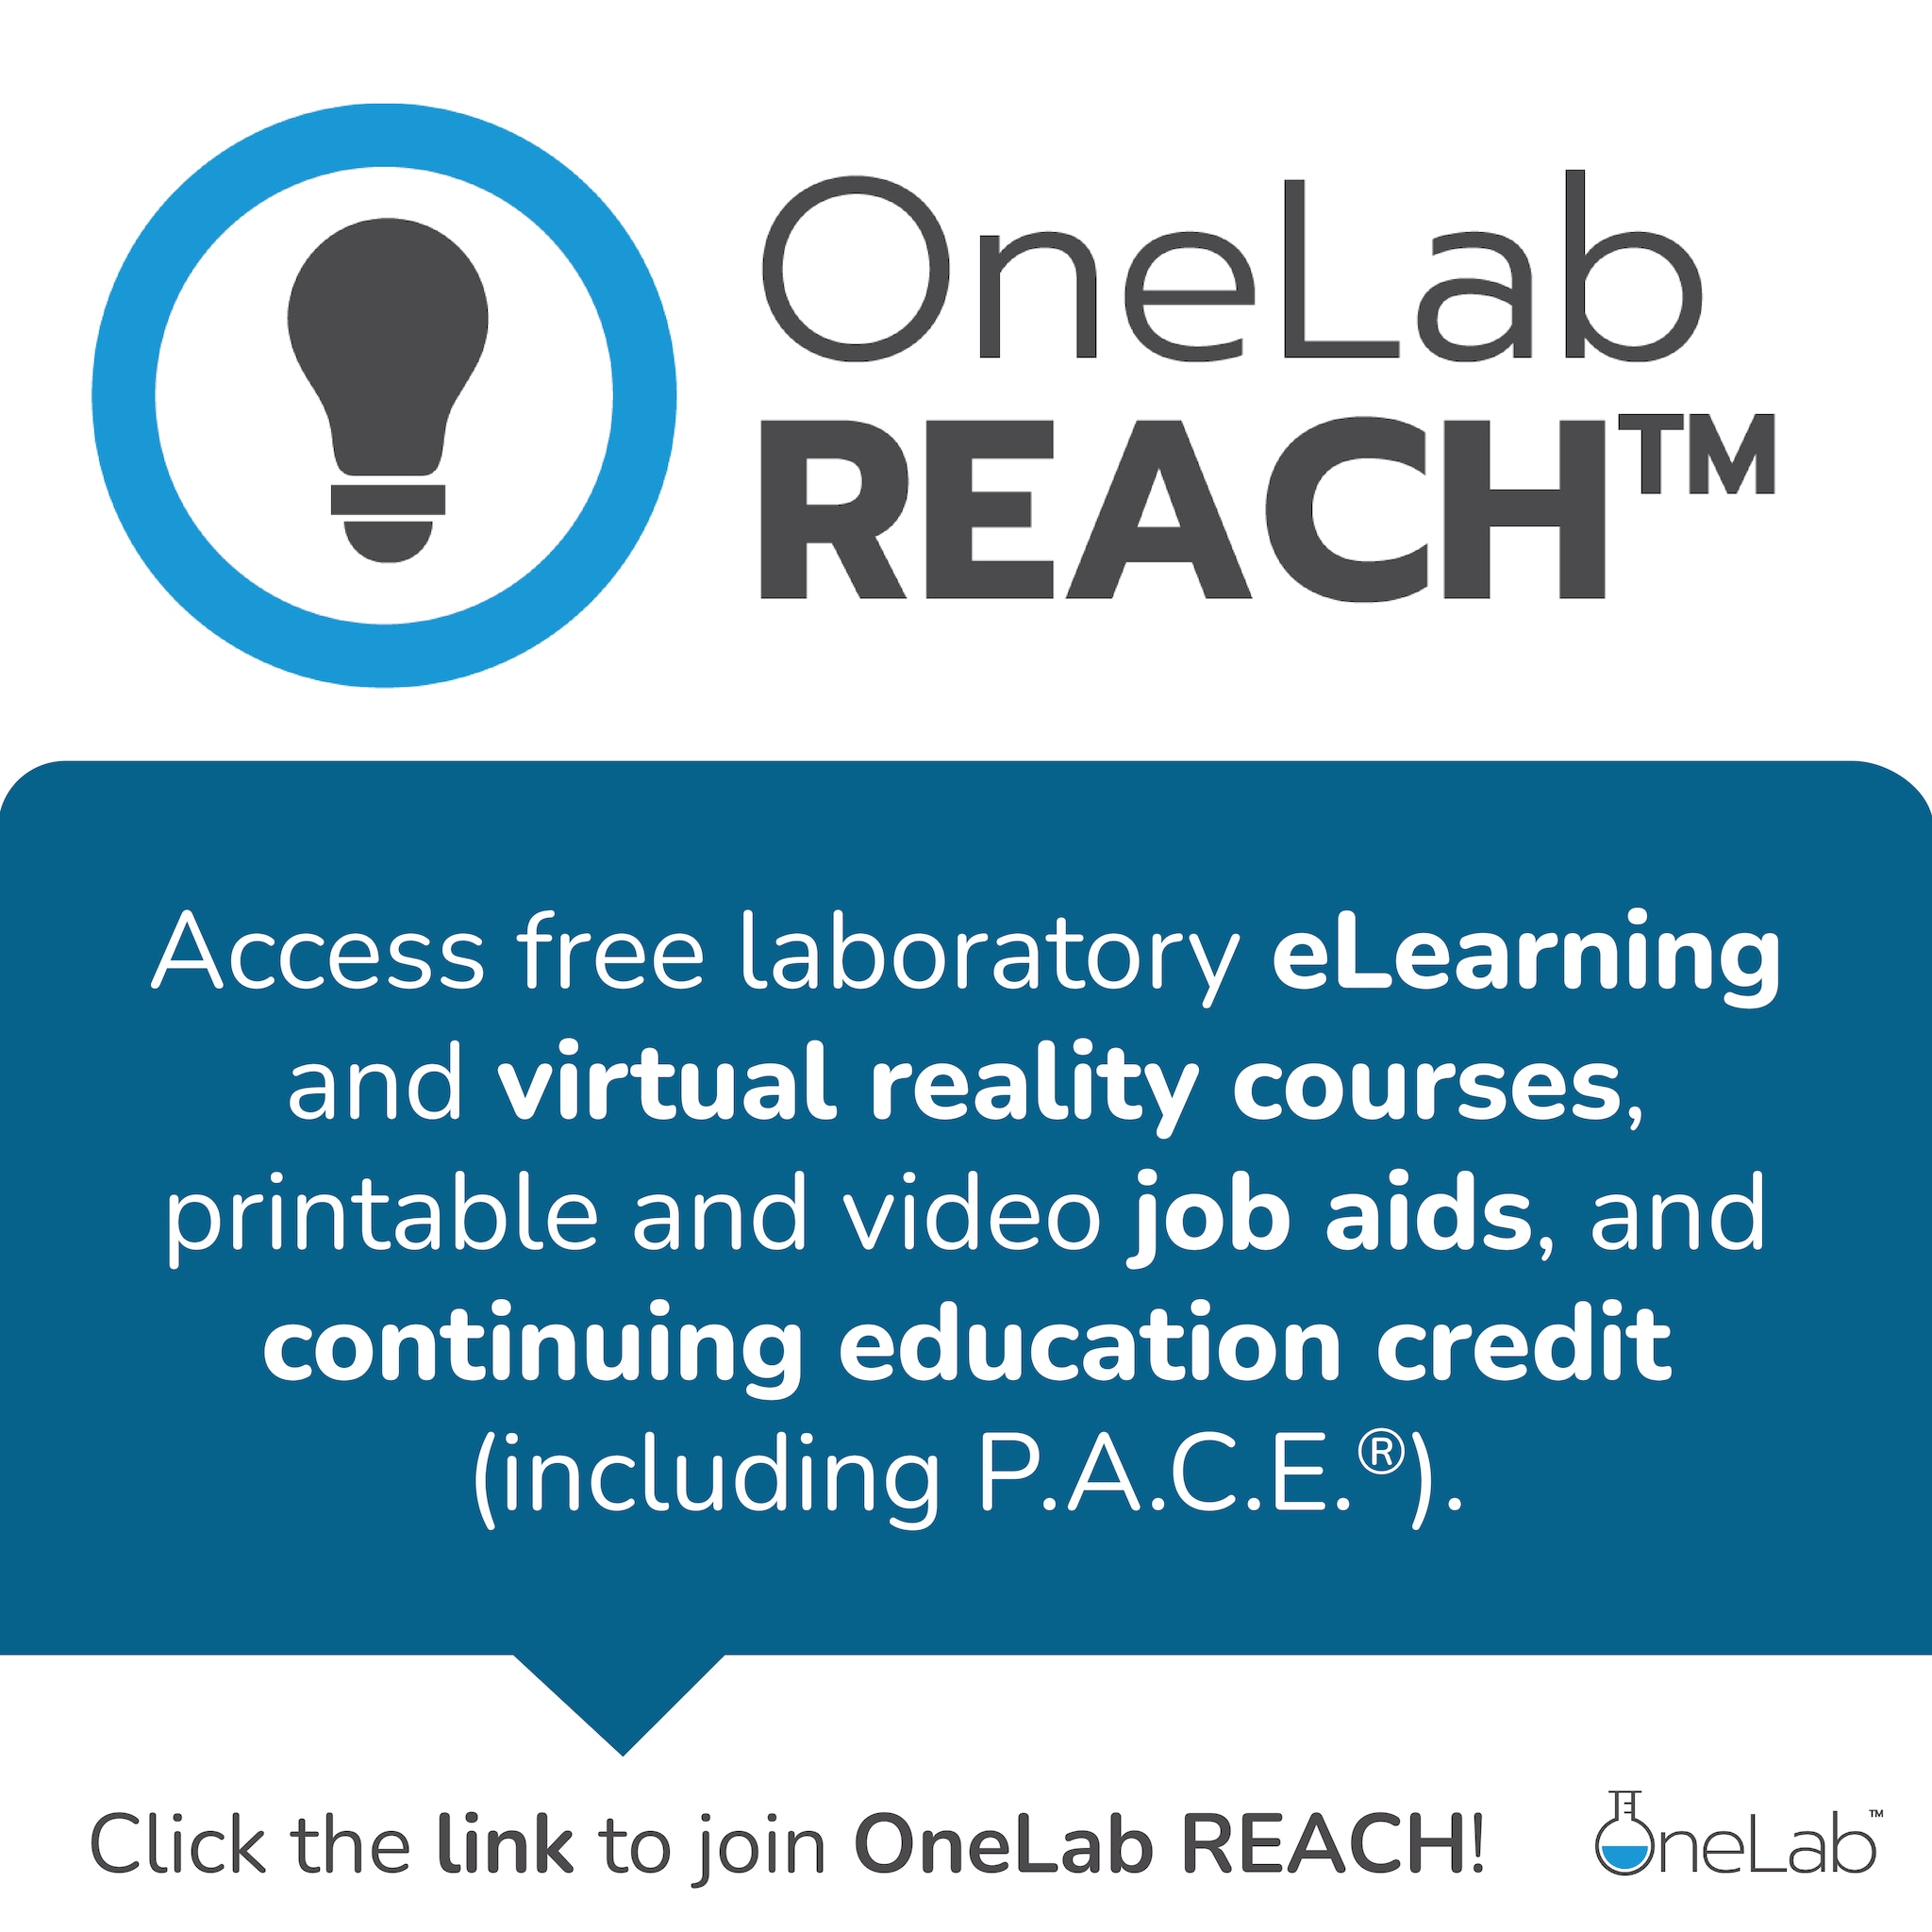 Blue, black, and green text graphic with call to action for users to click the link to join OneLab REACH.